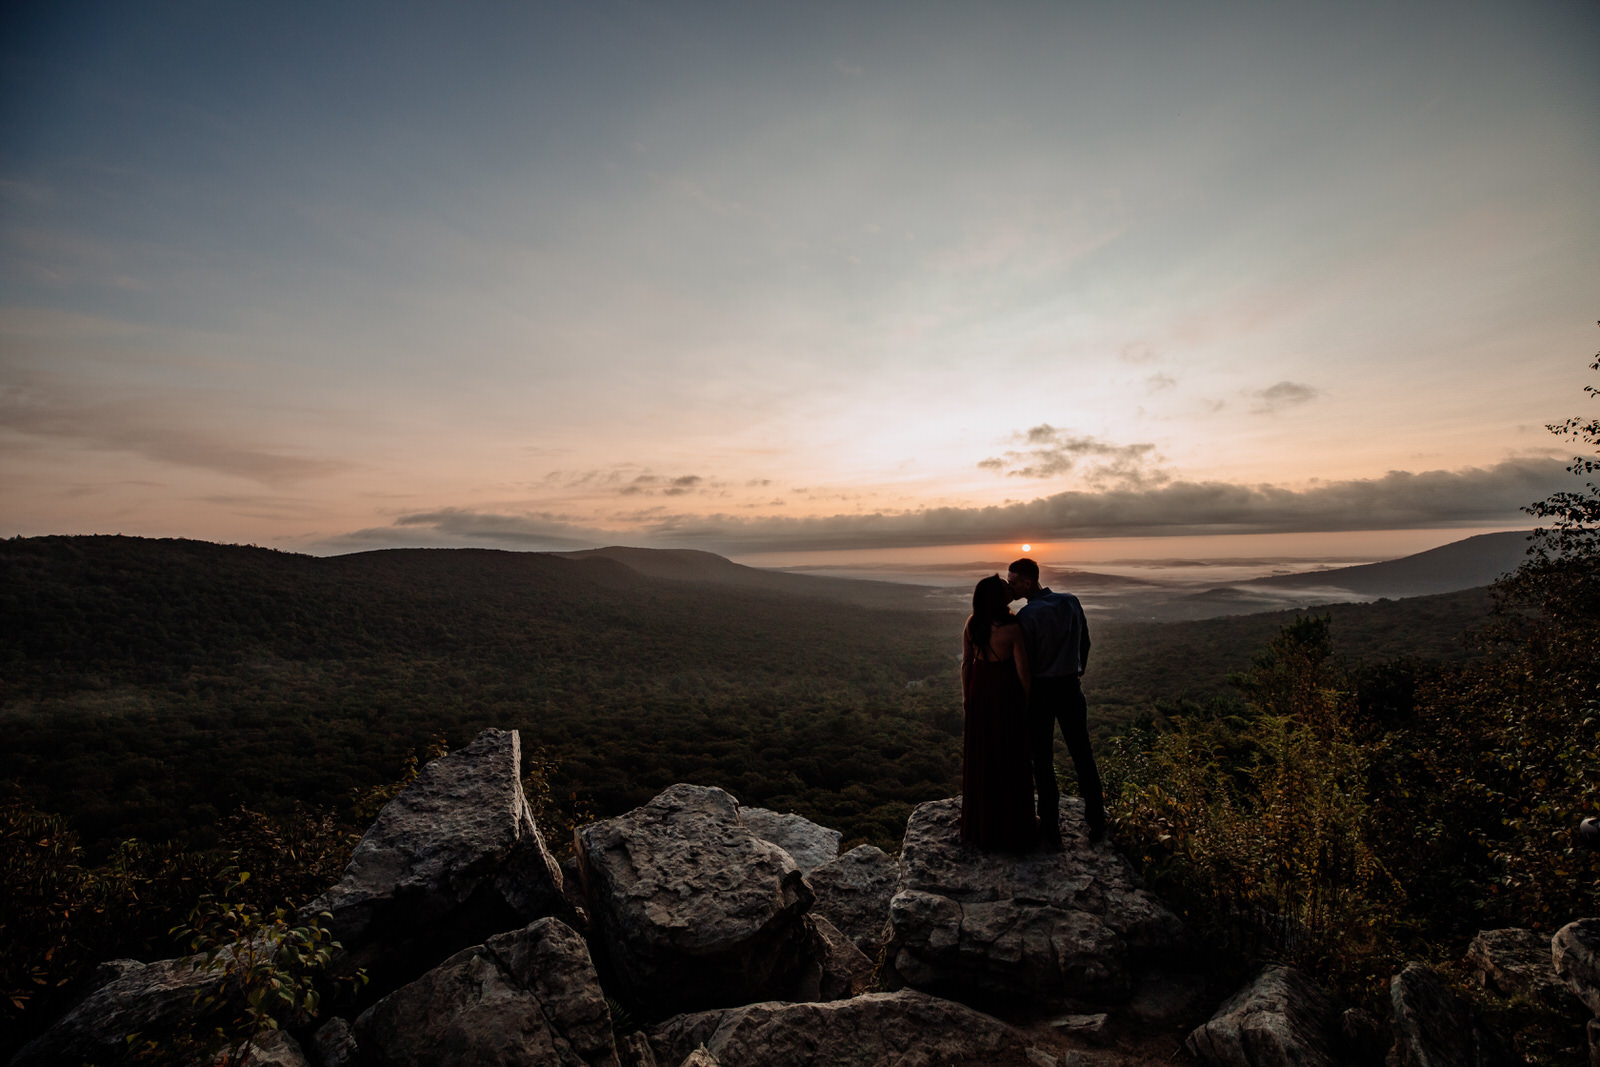 Sunrise engagement picture taken at Hawk Mountain (Kempton, PA). Couple seen silhouetted kissing with large landscape in background.